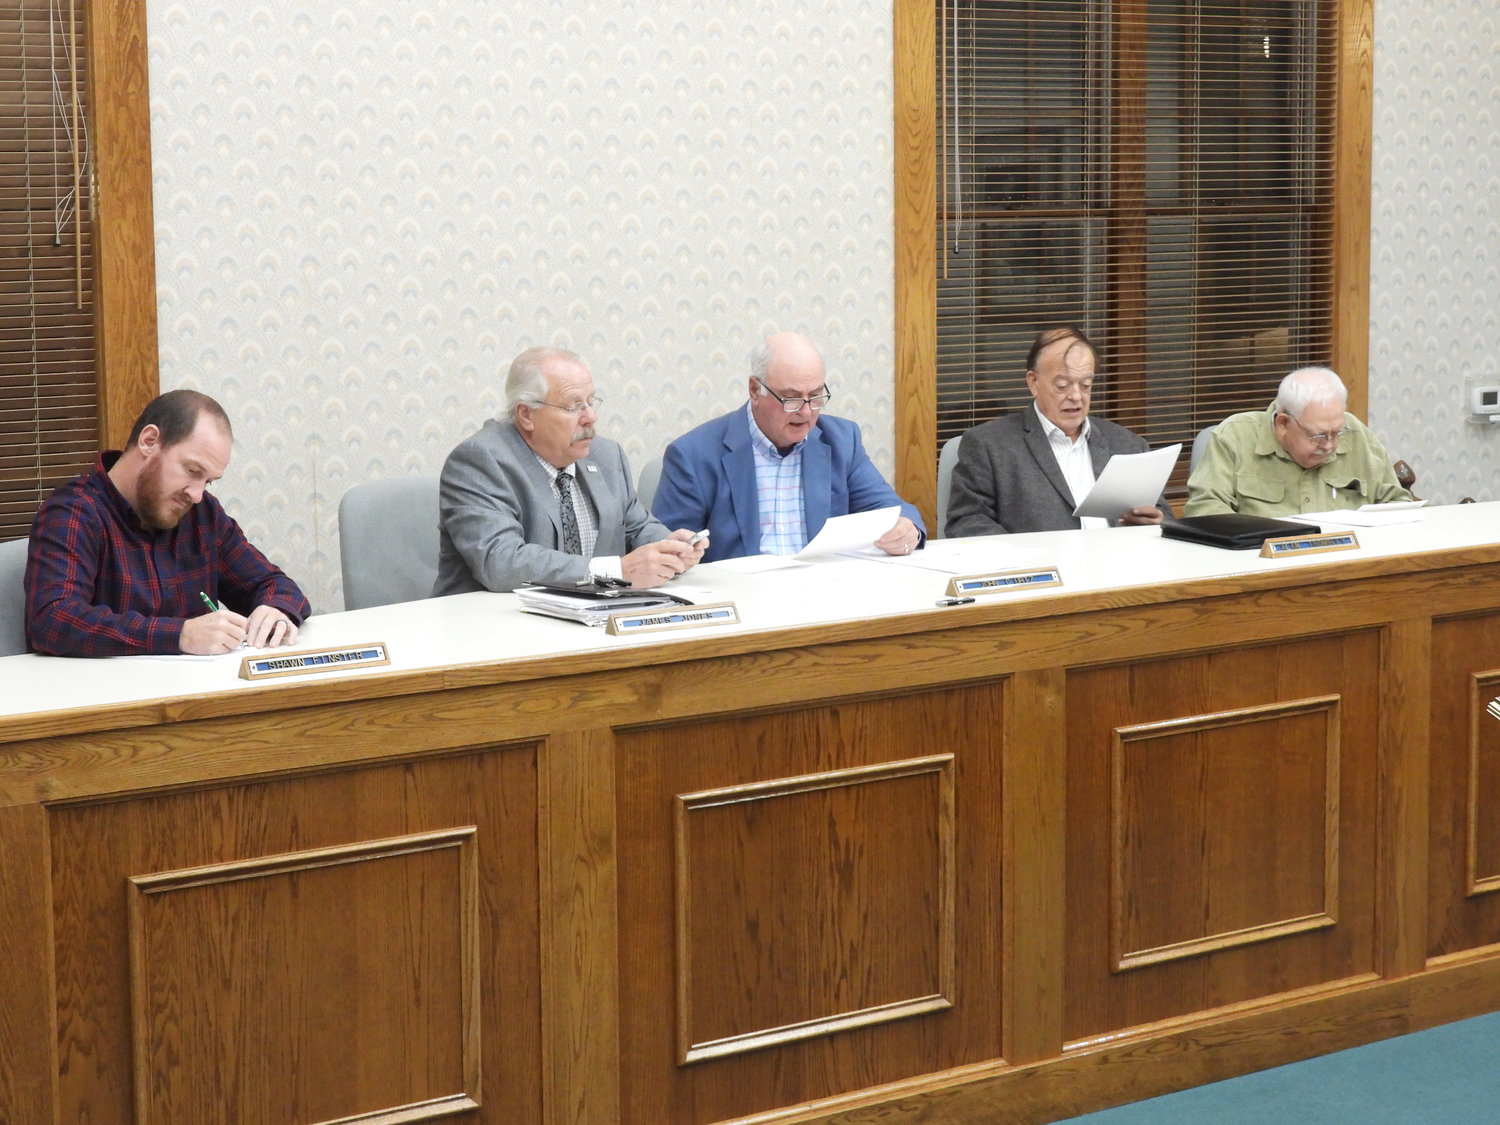 TUESDAY'S MEETING — The Lee Town Board holds a special meeting on Tuesday, Oct. 27. A public hearing was held to discuss the 2022 town budget before it was passed unanimously. The next town meeting will be on Tuesday, Nov. 9 at 7 p.m.